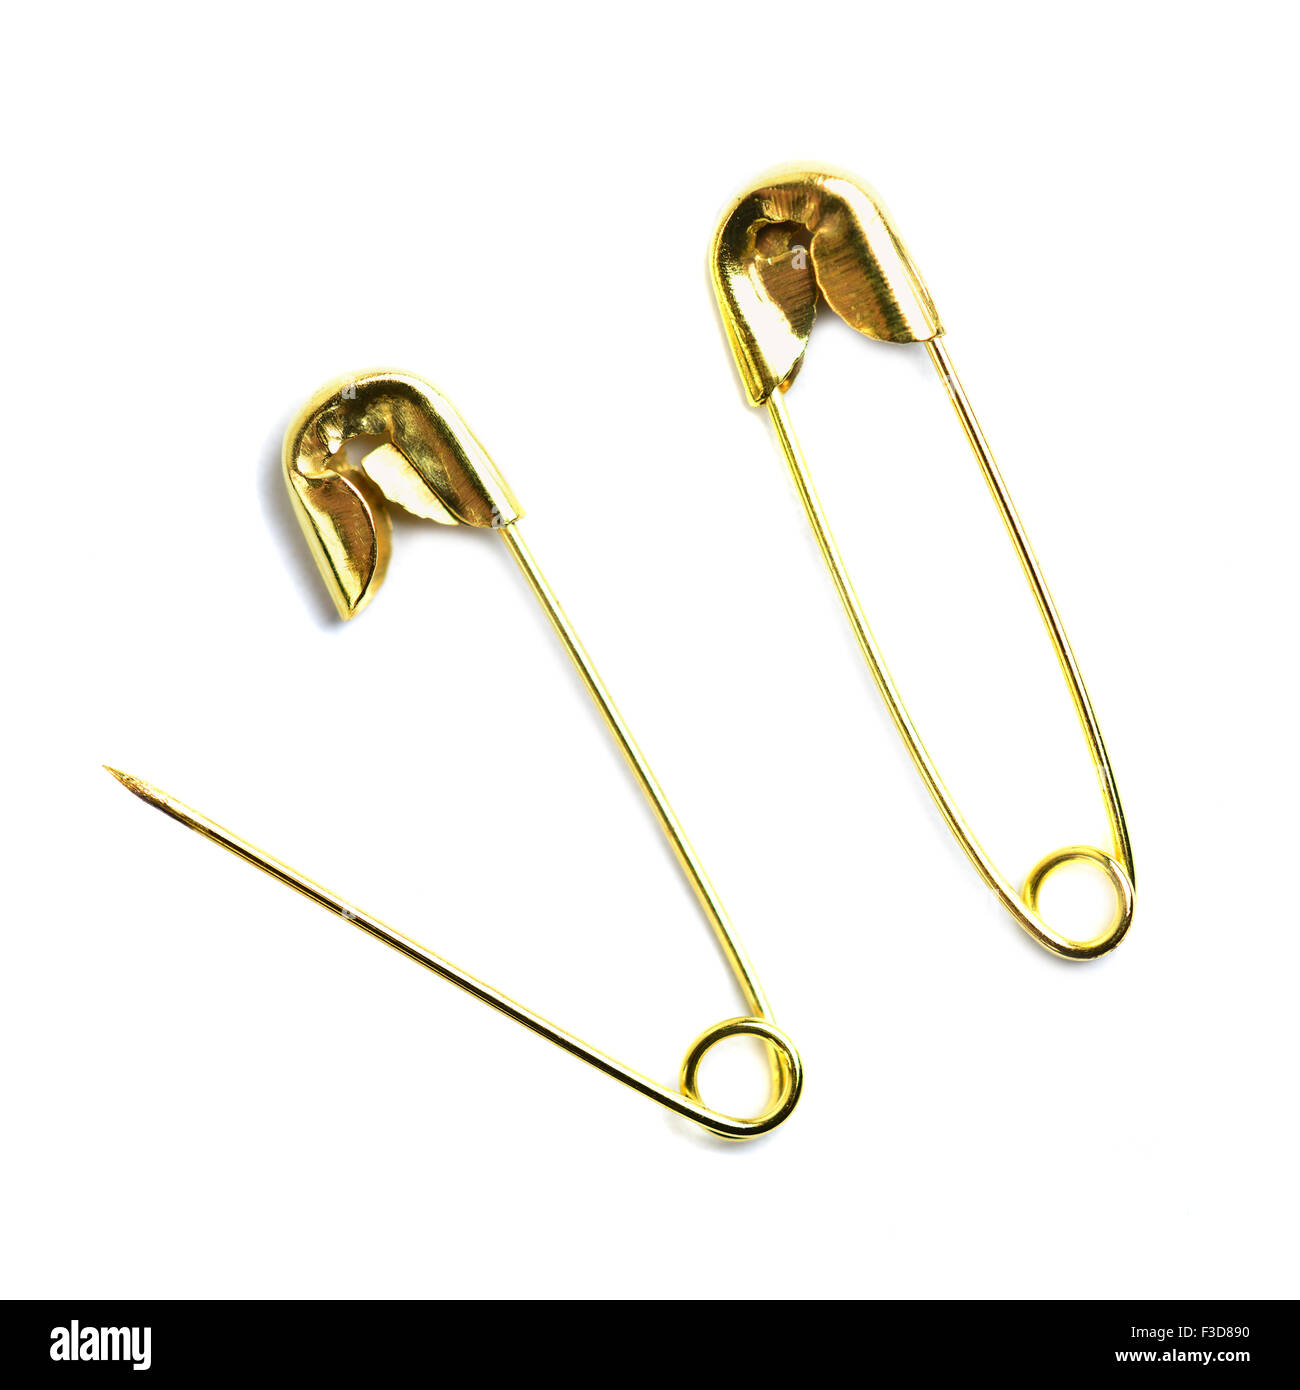 Gold Color Safety Pins Commonly Used Fasten Clothing Isolated White Stock  Photo by ©shamils 649534818